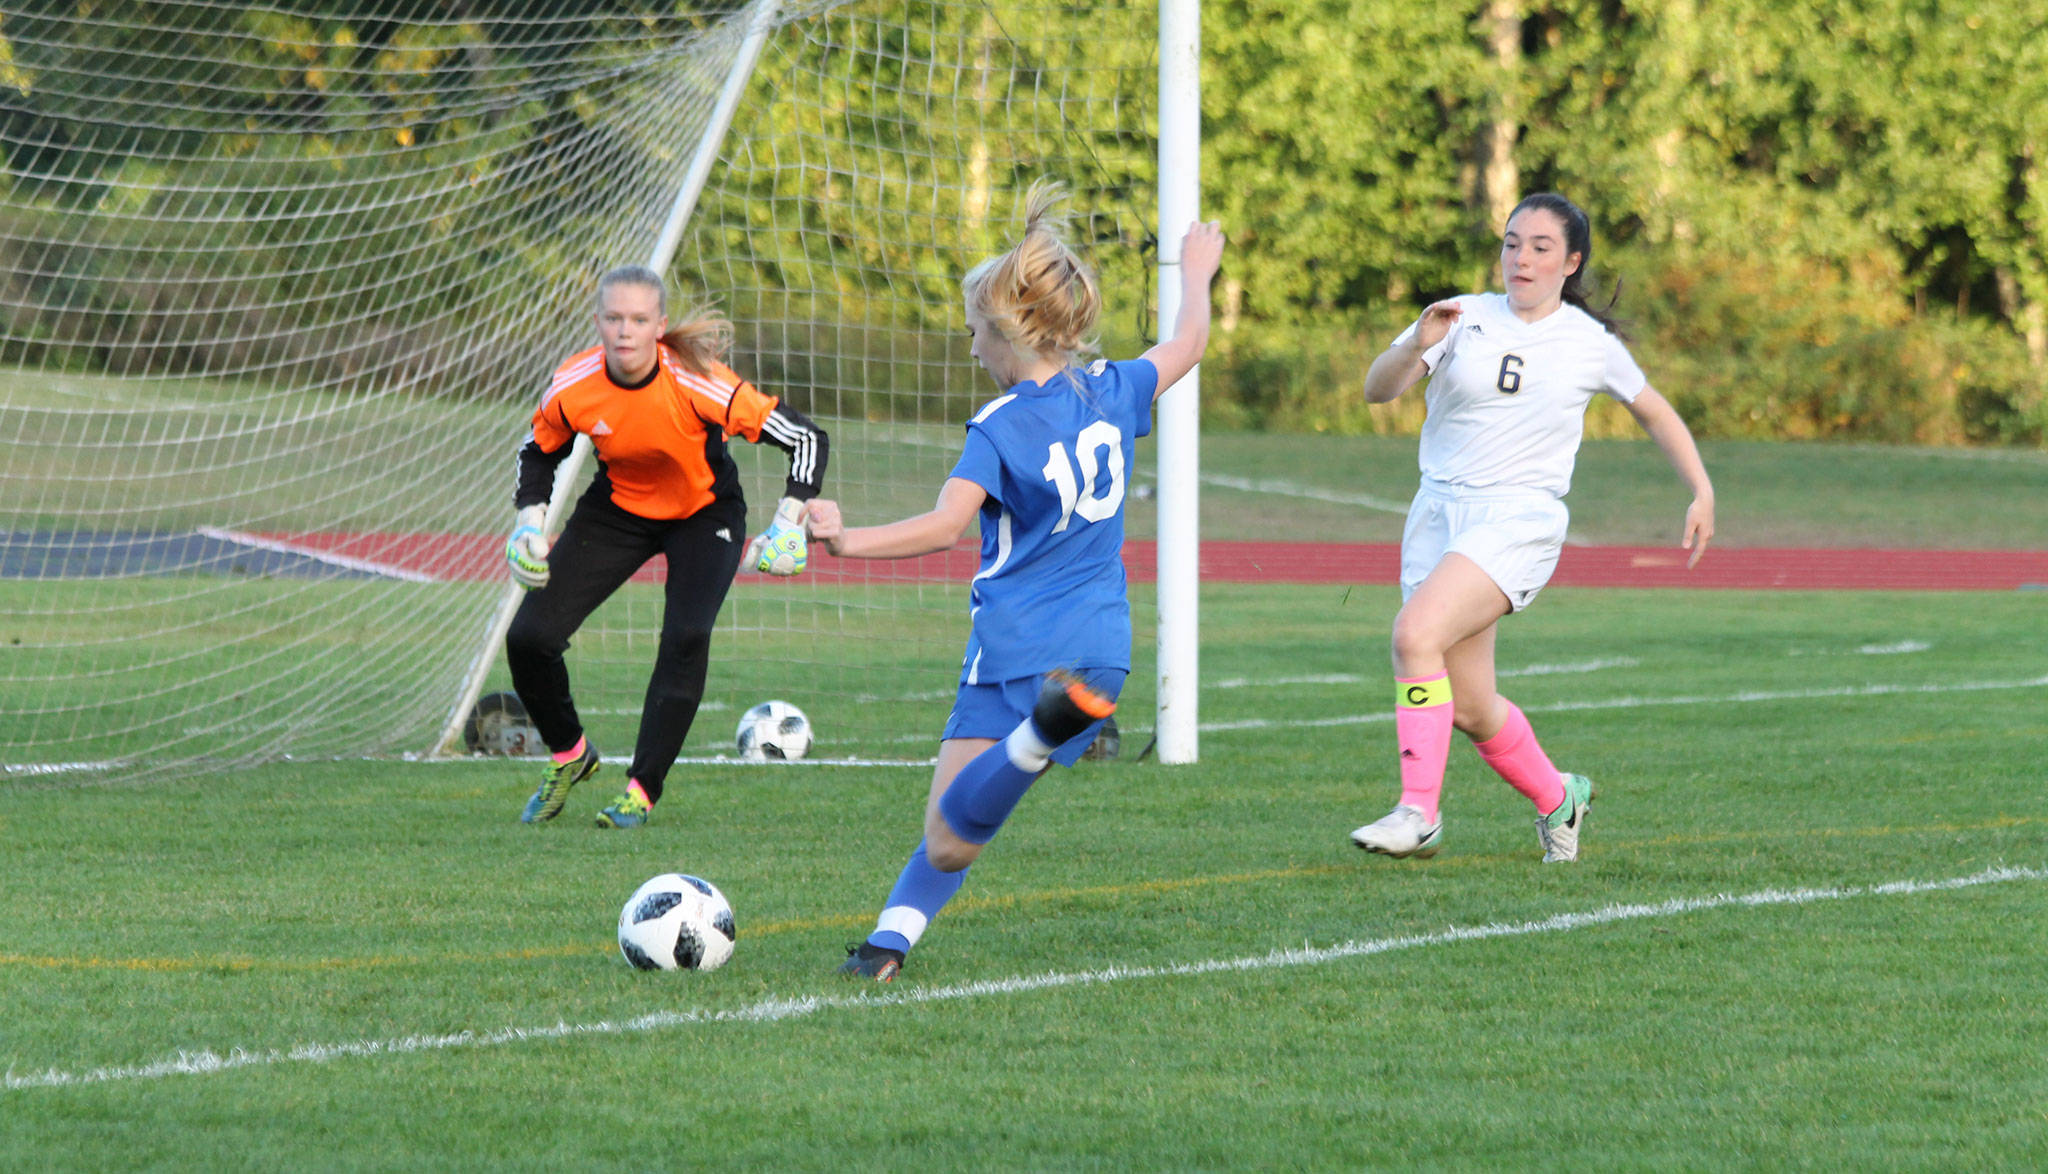 Mikenna Wicher punches in South Whidbey’s first goal in a 5-0 win over Cedar Park Christian. (Photo by Jim Waller/South Whidbey Record)